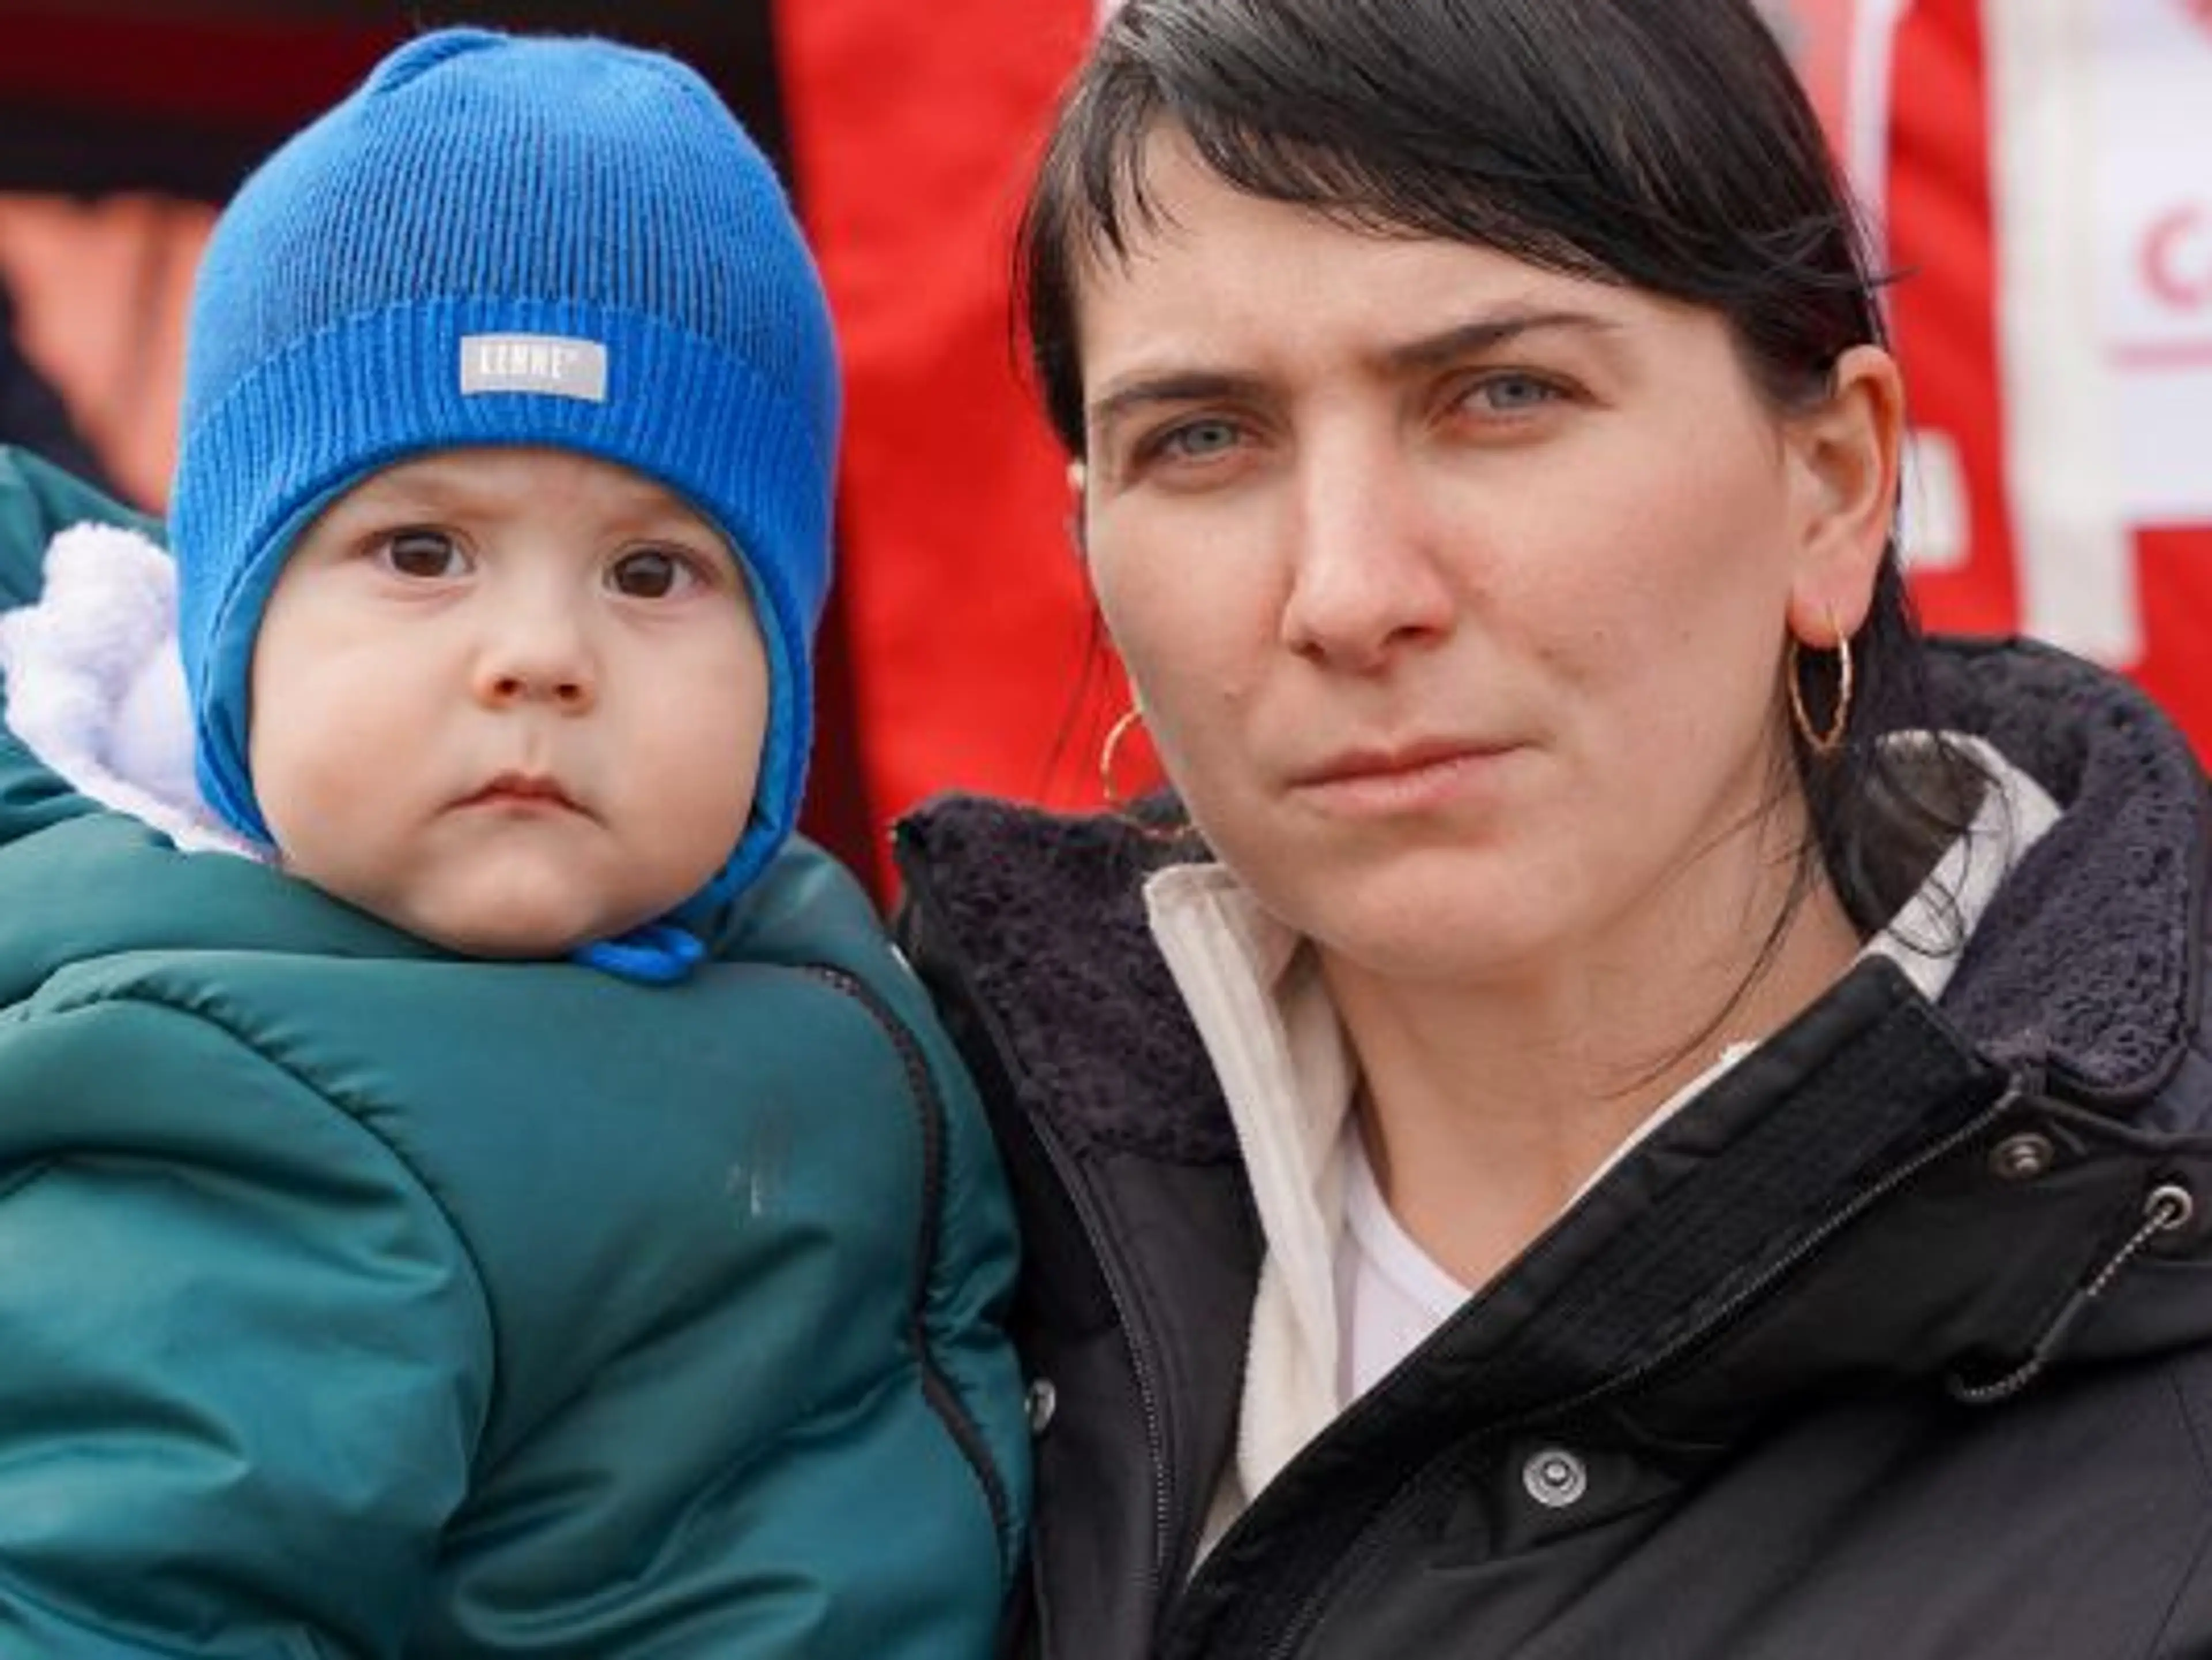 Ukraine refugees - a mother and her son cross into Poland.